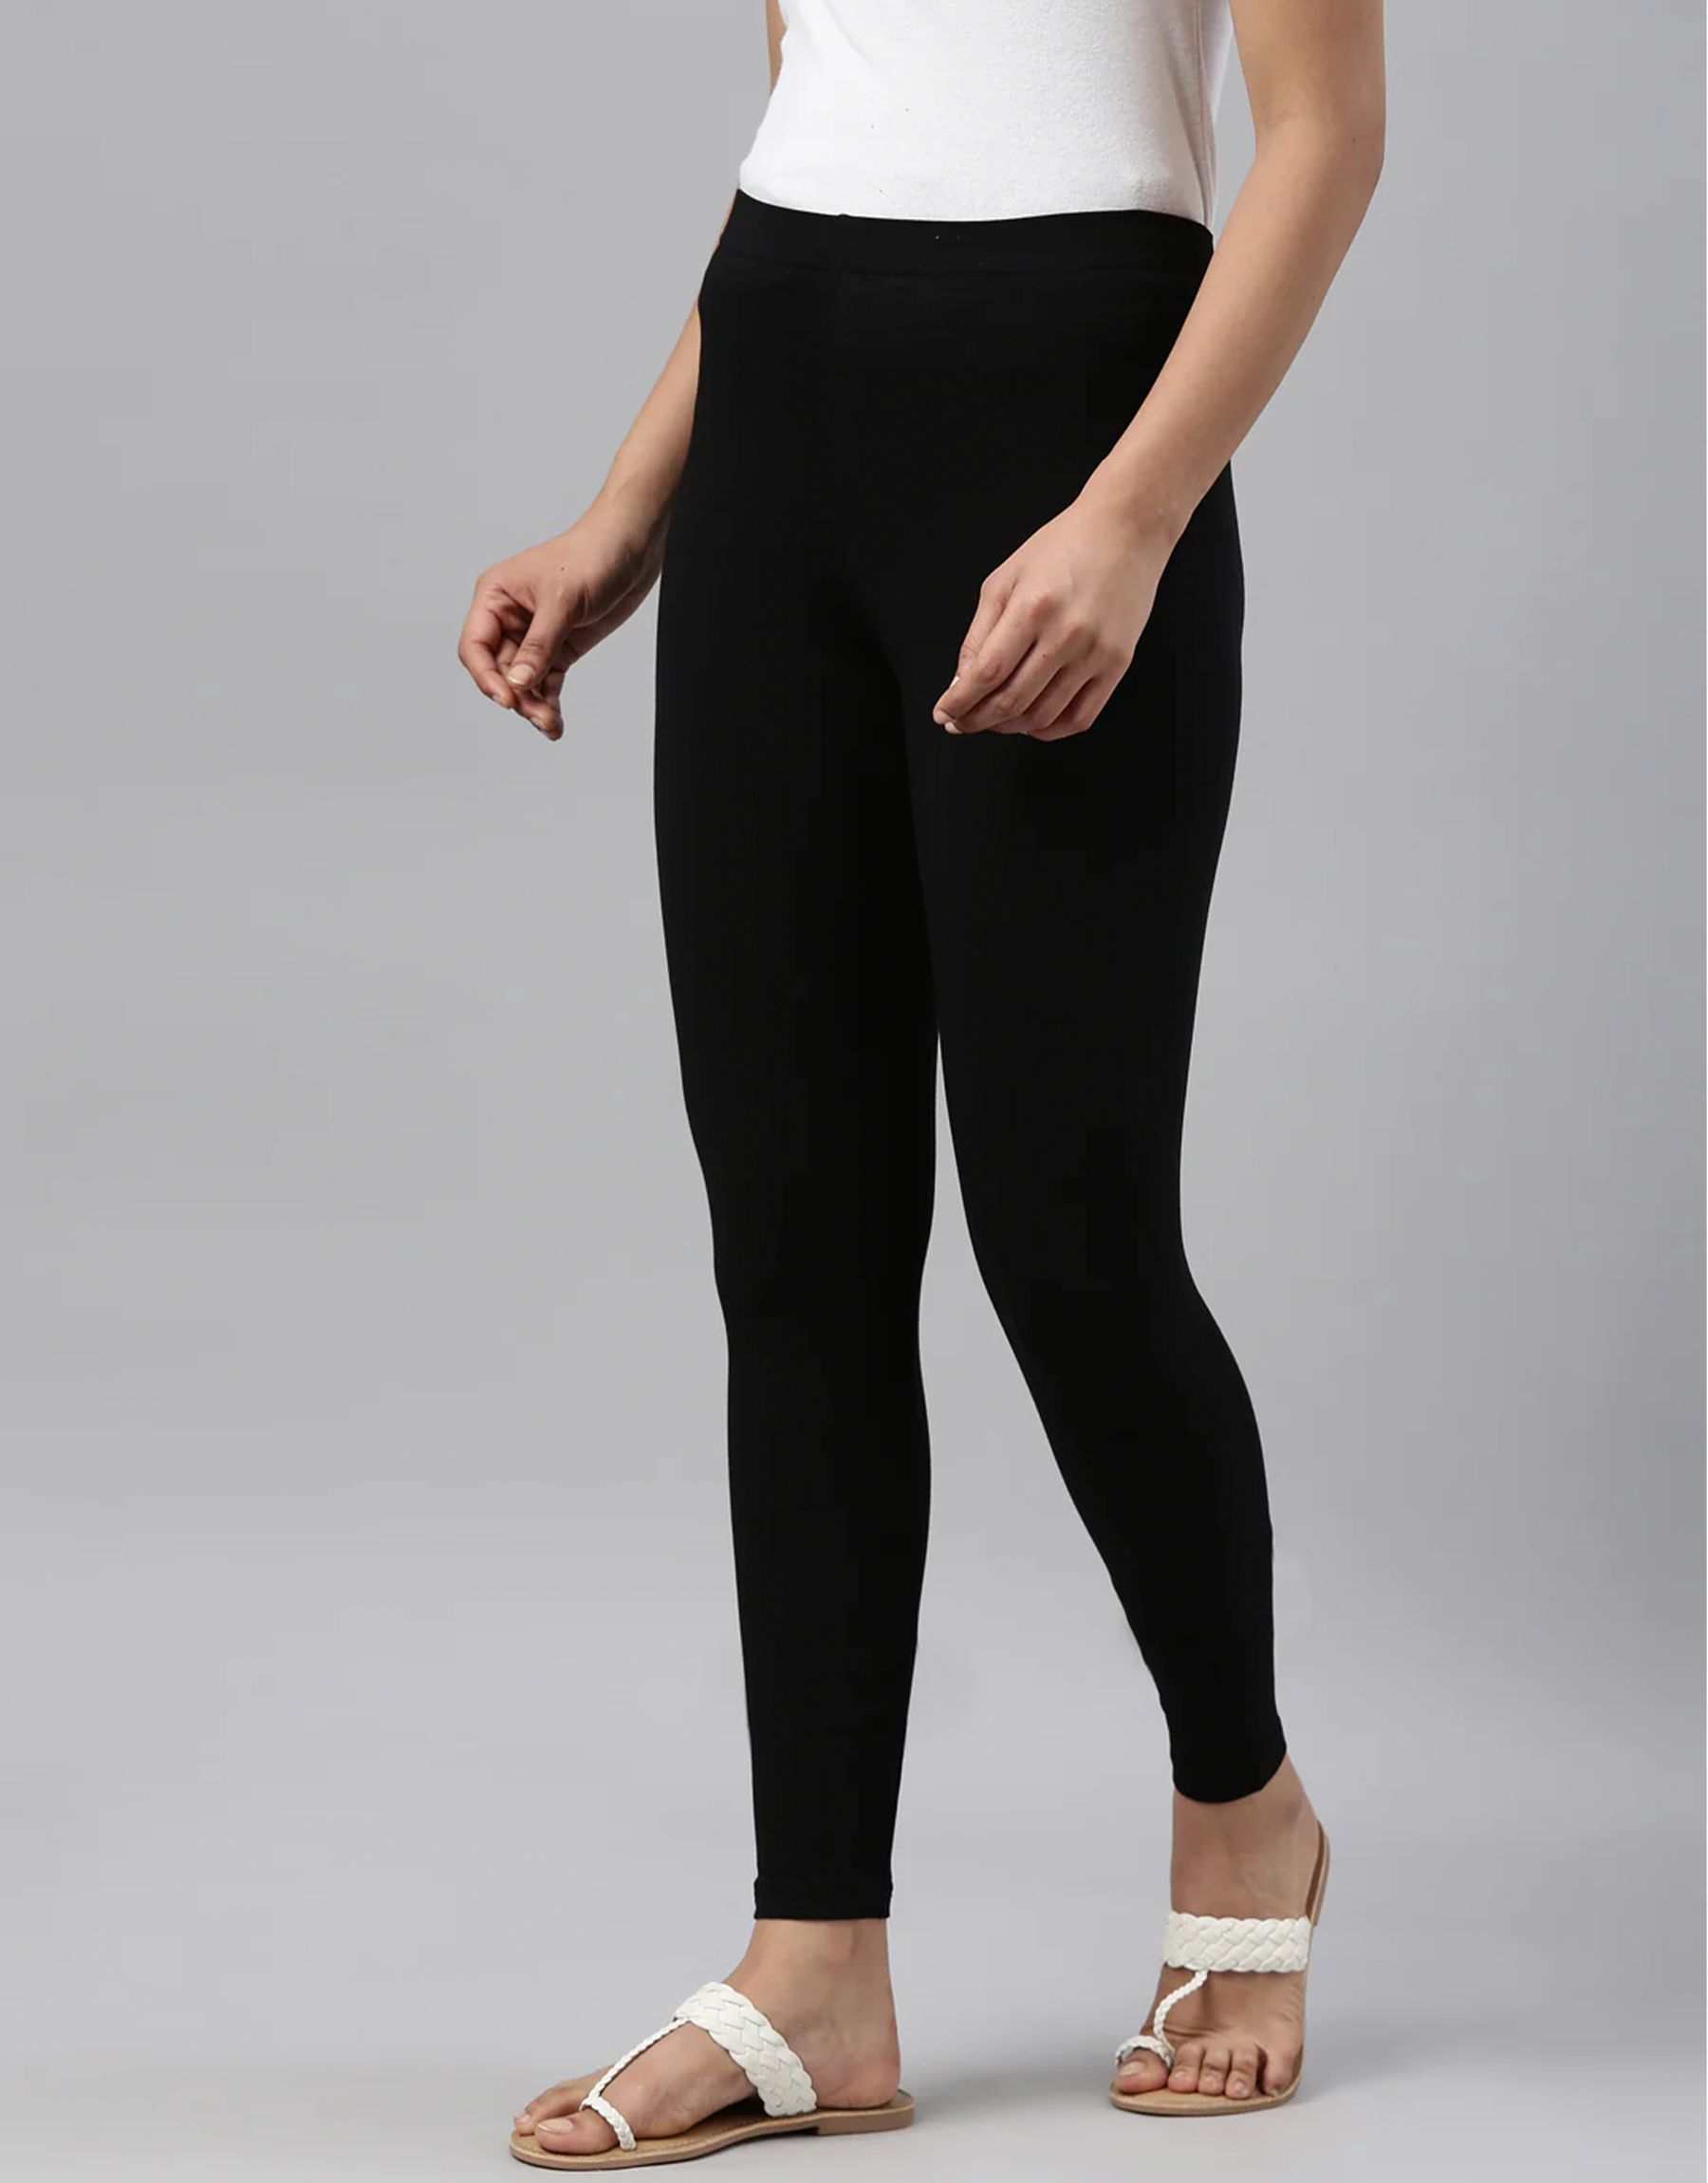 Plus Size Women's Ankle-Length Essential Stretch Legging by